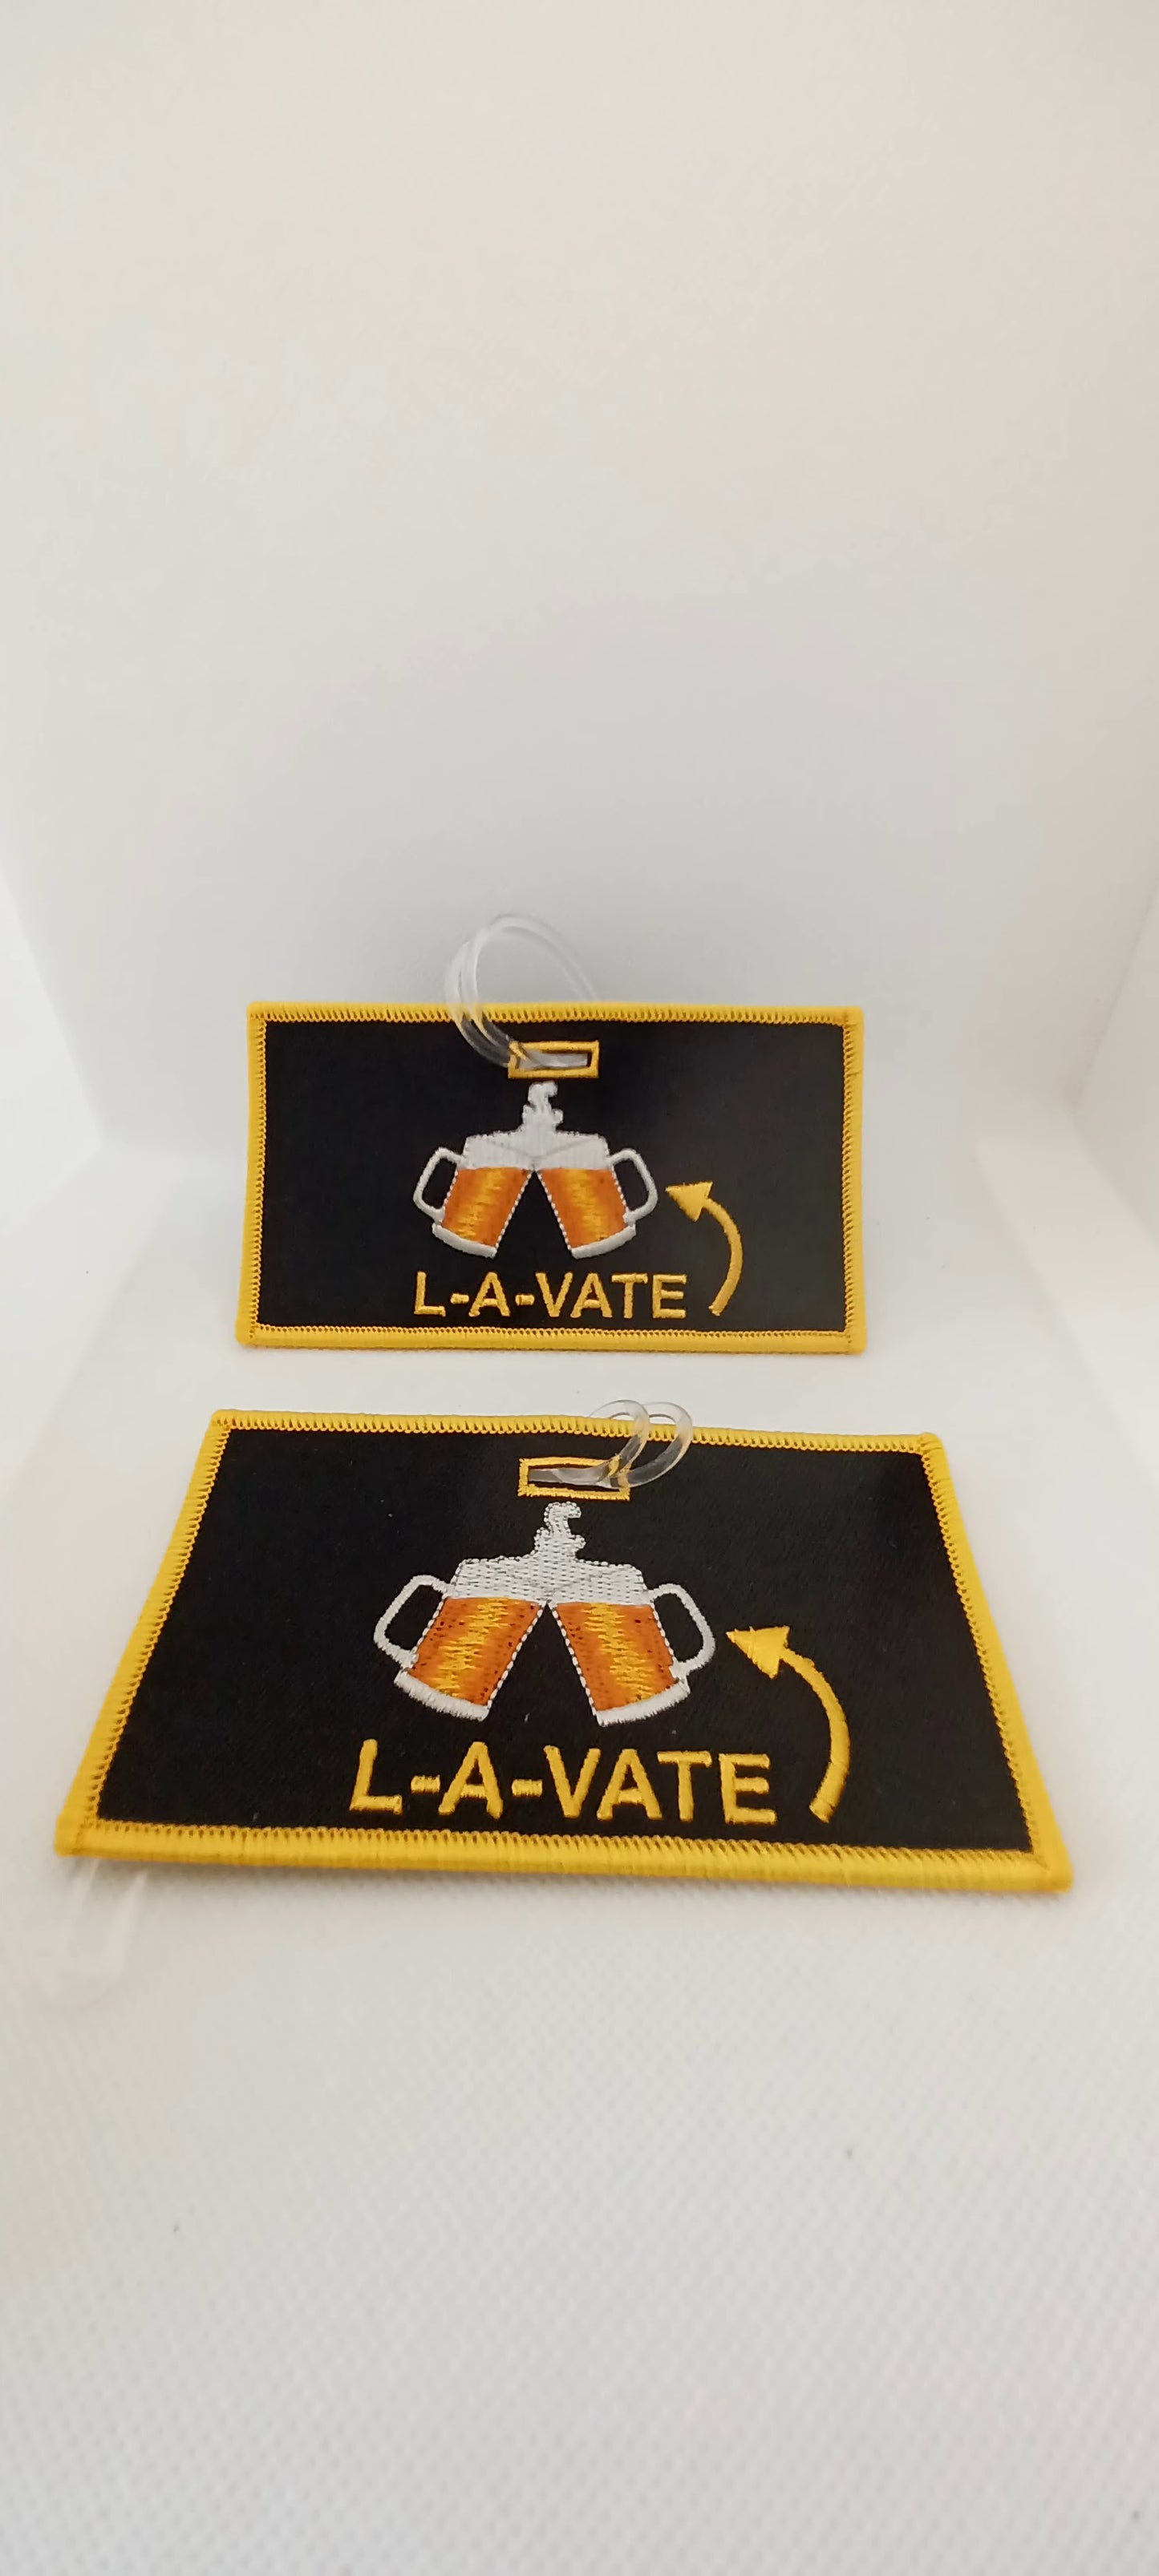 L-A-VATE Luggage Tag